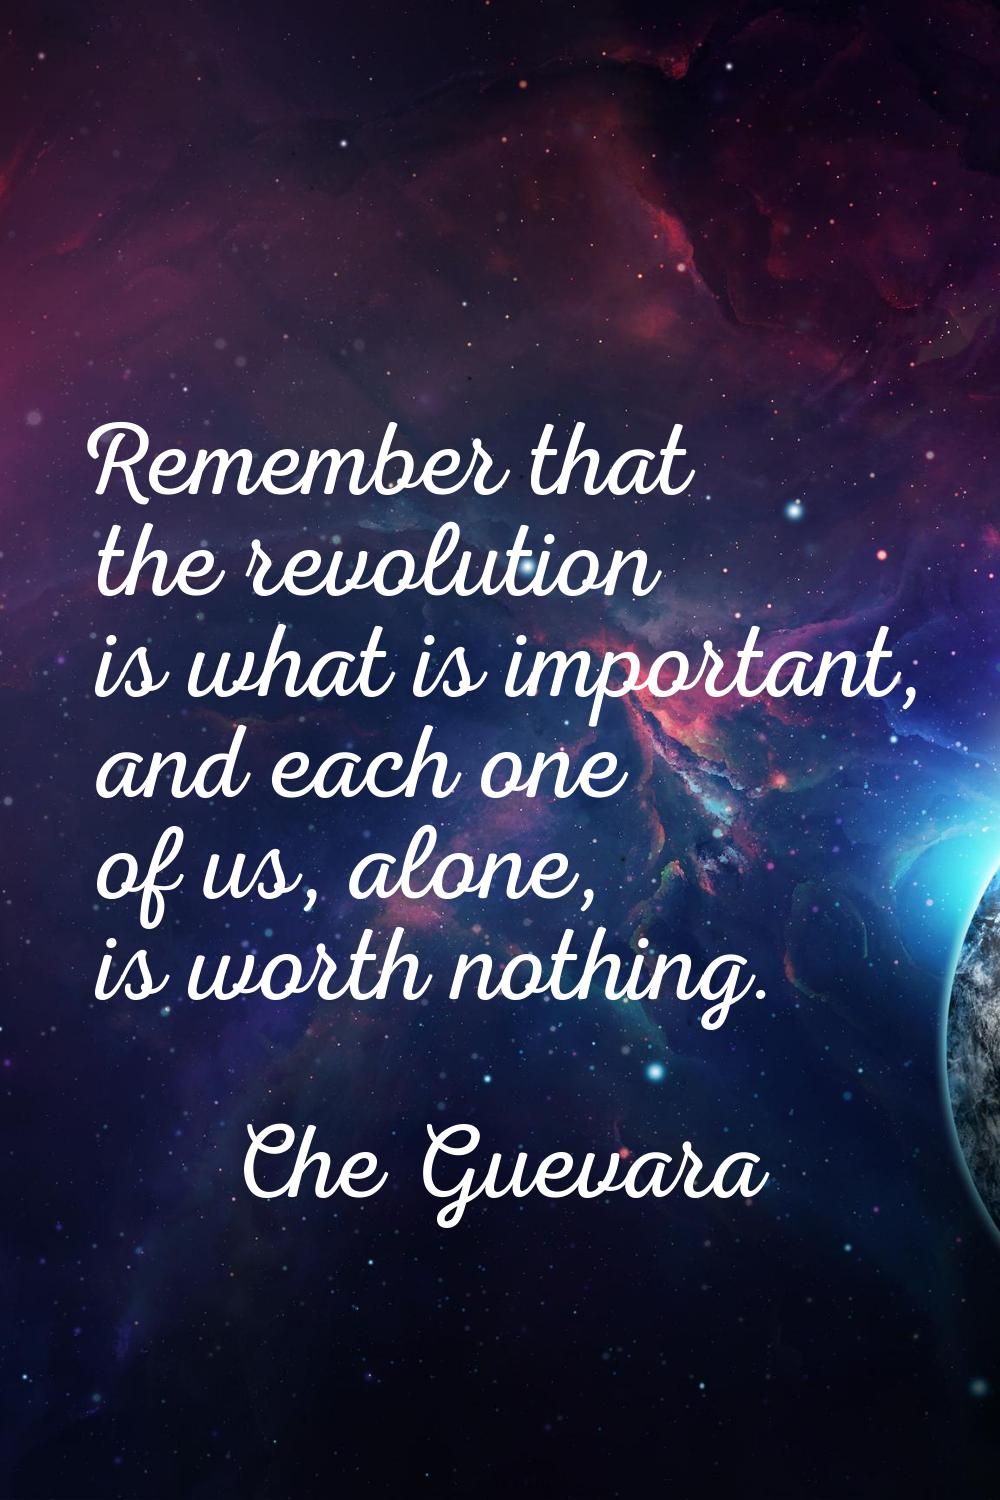 Remember that the revolution is what is important, and each one of us, alone, is worth nothing.